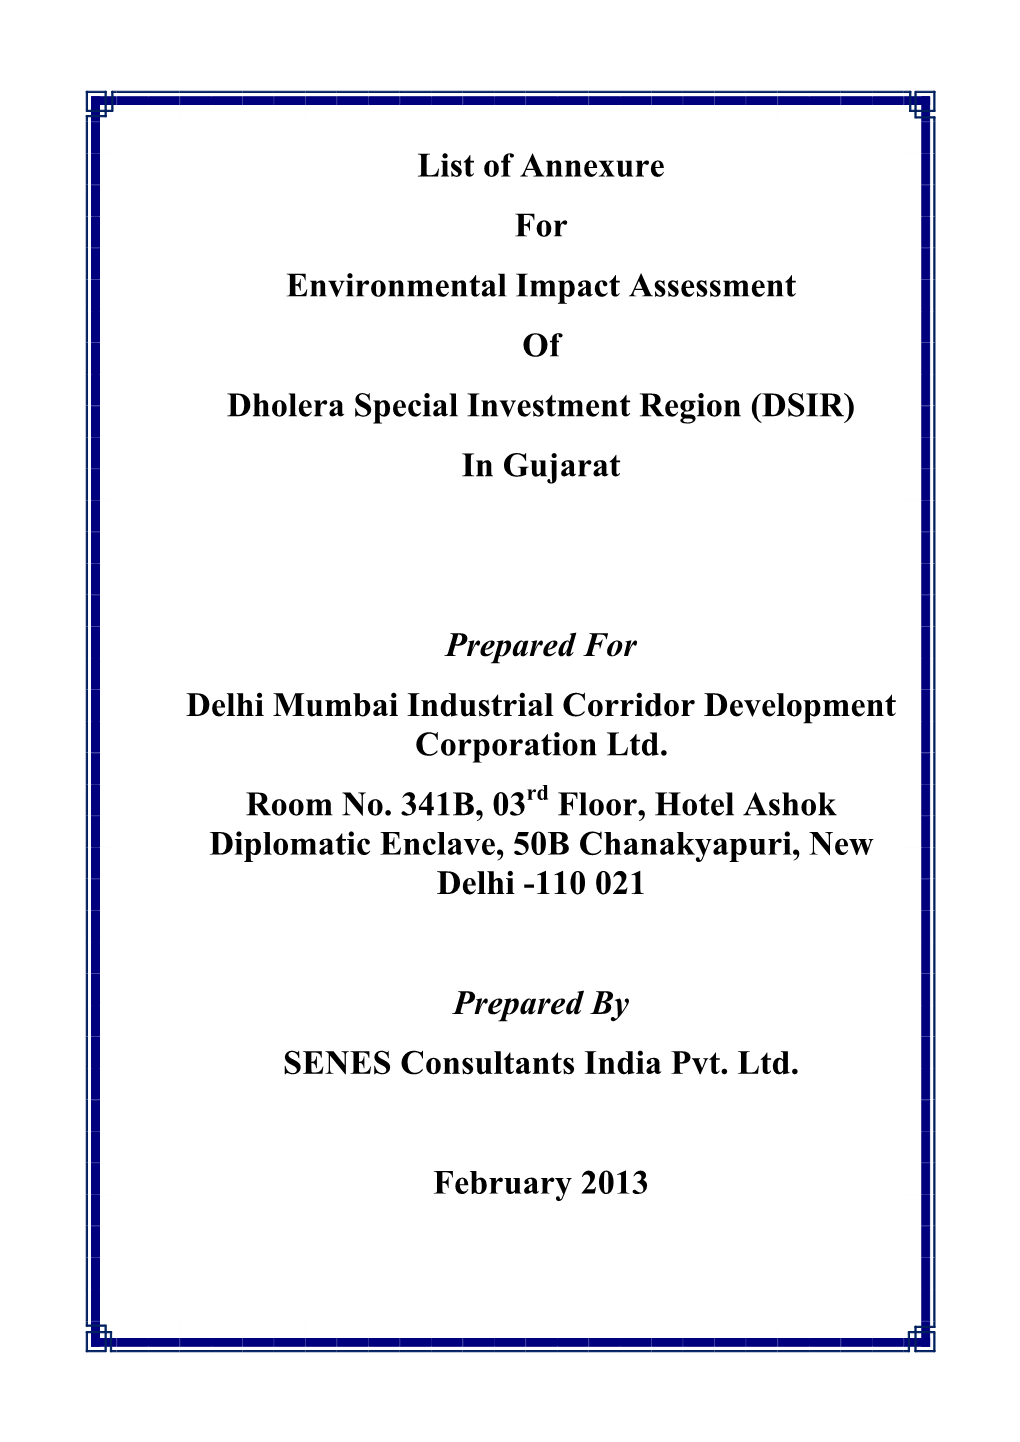 List of Annexure for Environmental Impact Assessment of Dholera Special Investment Region (DSIR) in Gujarat